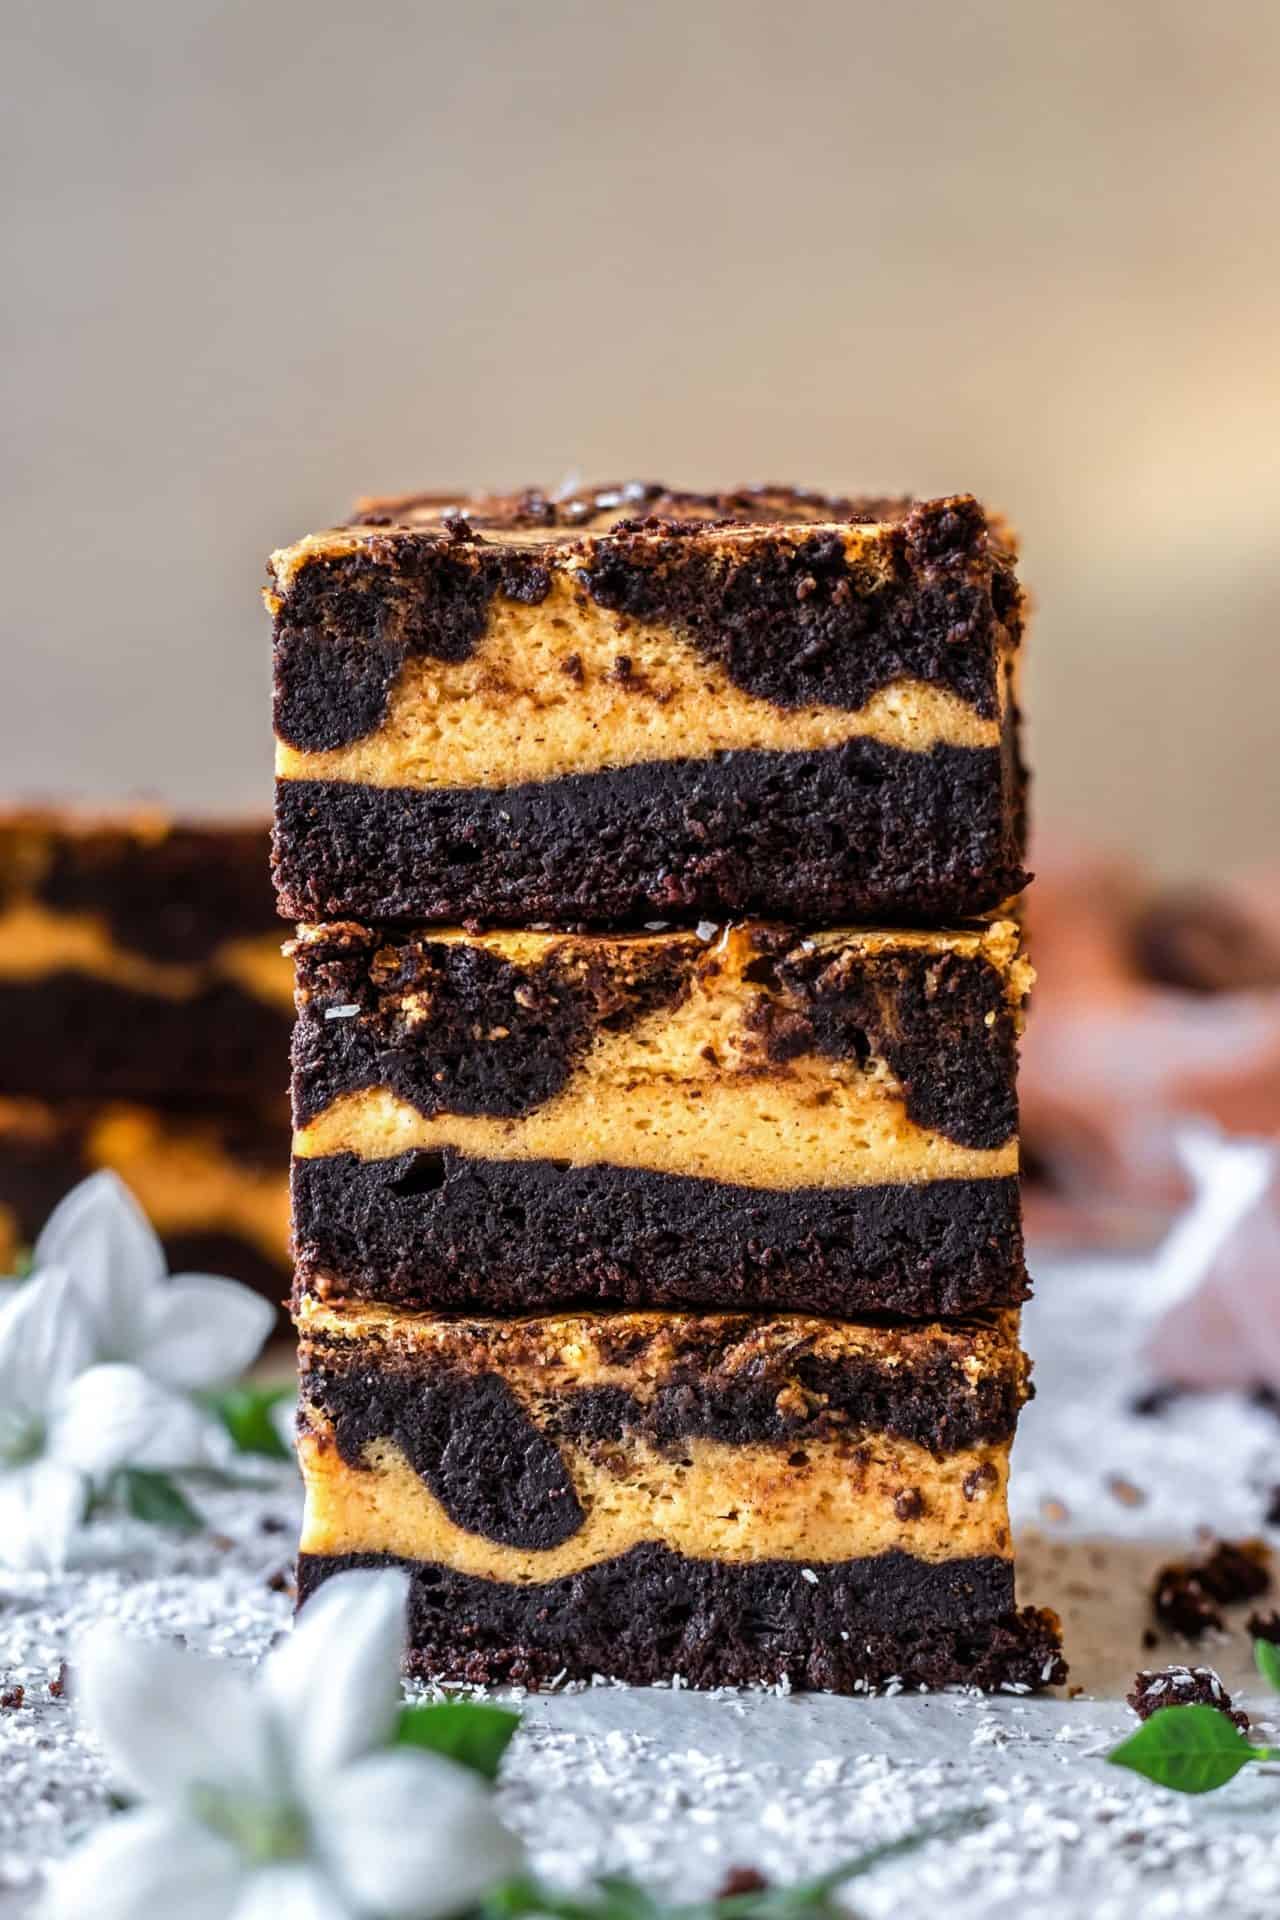 These Gluten-Free Pumpkin Cheesecake Brownies are perfectly sweetened, super chocolaty, pumpkin-infused, gooey, and just so delicious!